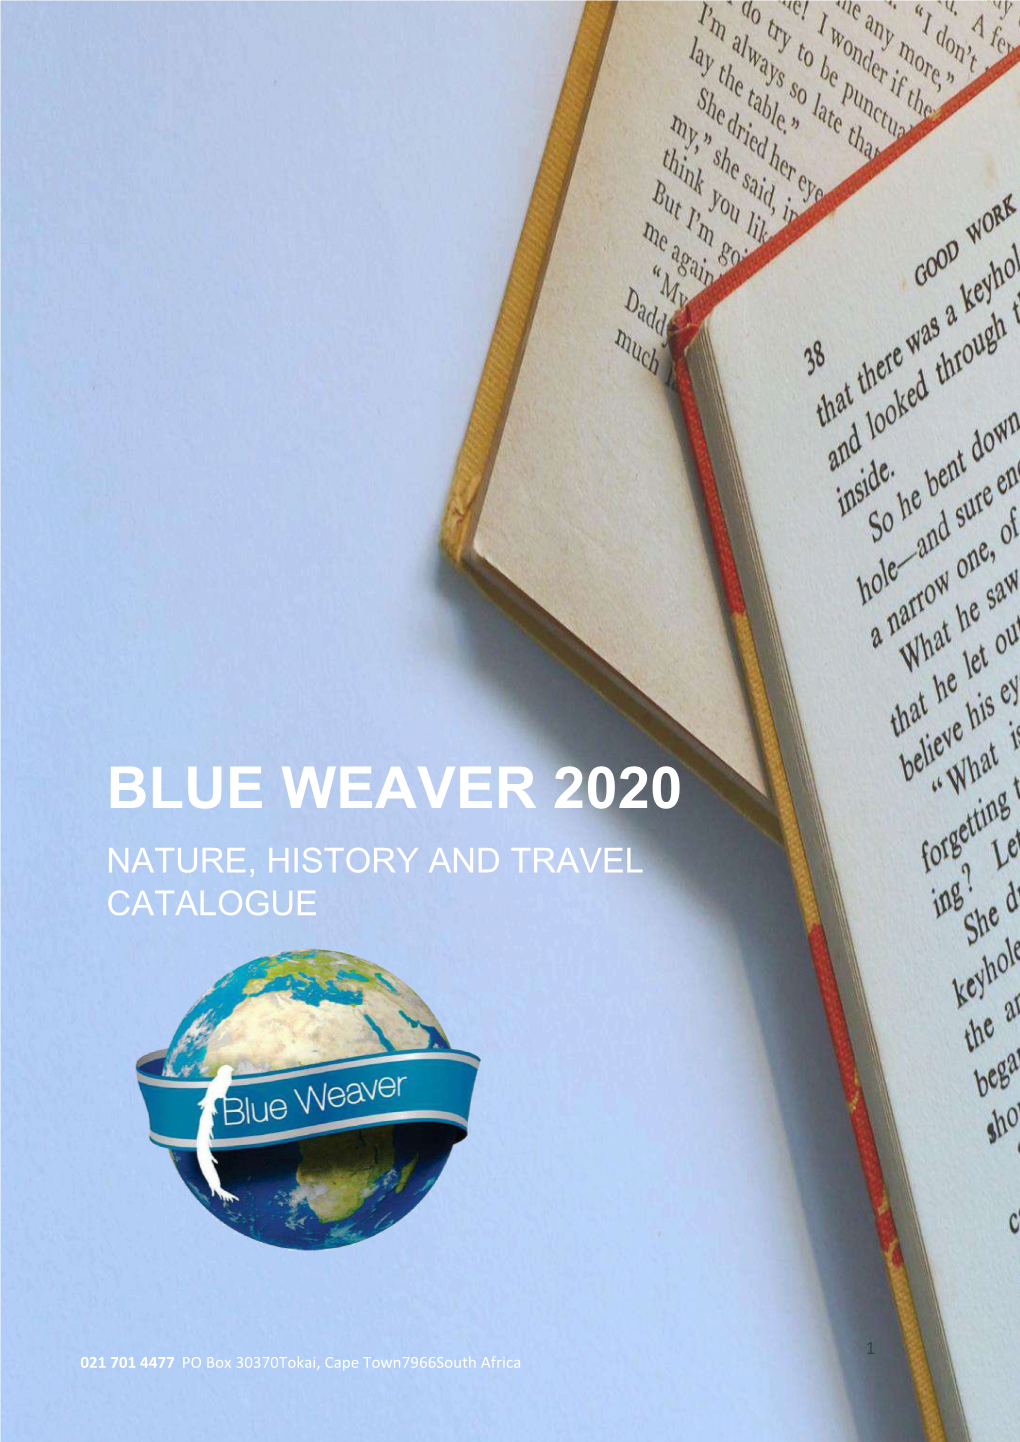 Blue Weaver 2020 Nature, History and Travel Catalogue